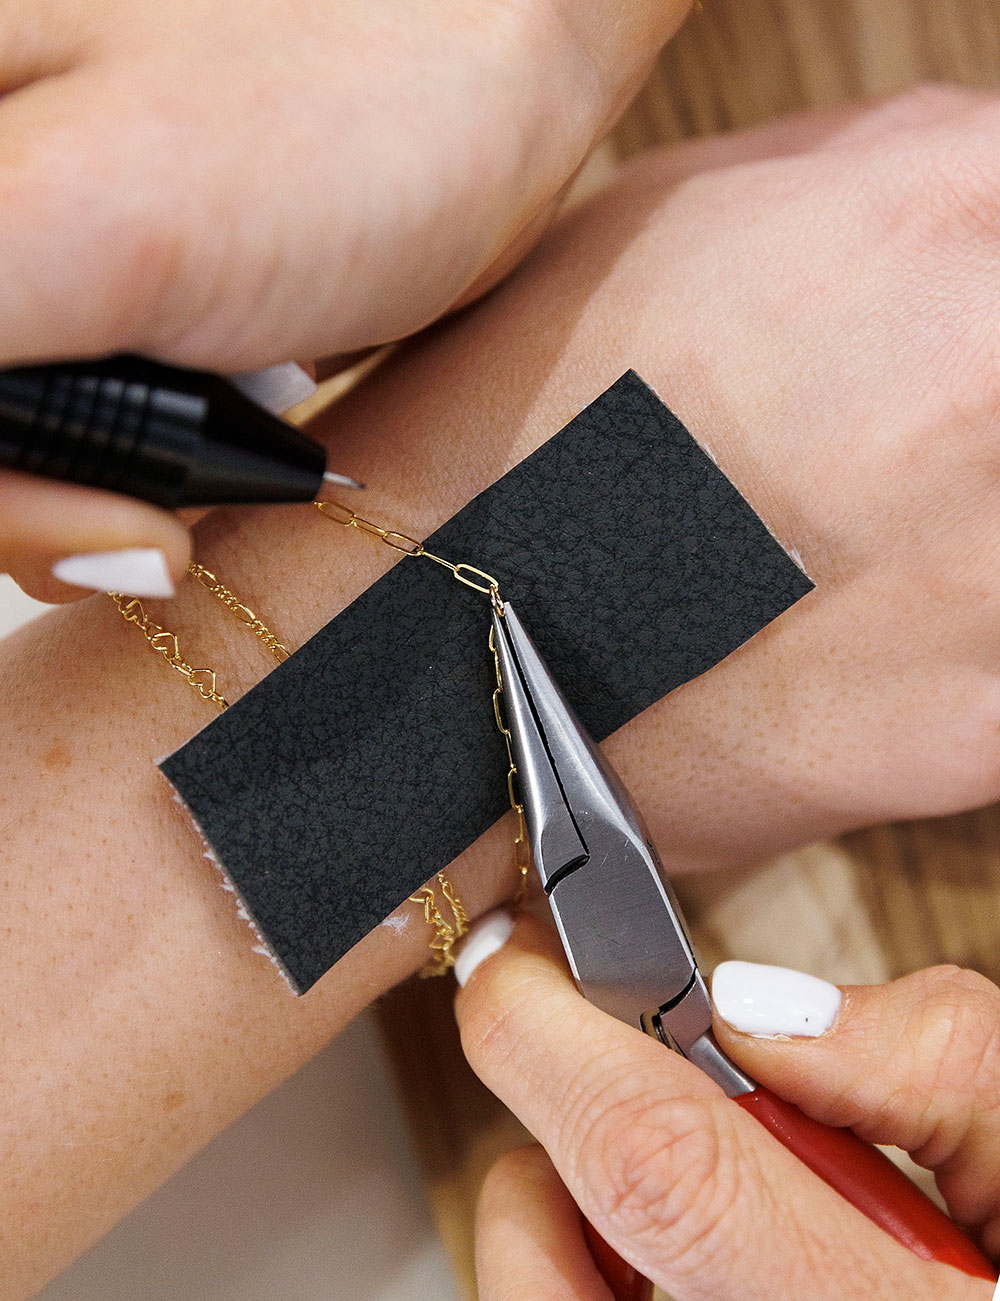 A delicate 14K gold filled bracelet is welded on at one of Linked by Taylor's pop-up events.